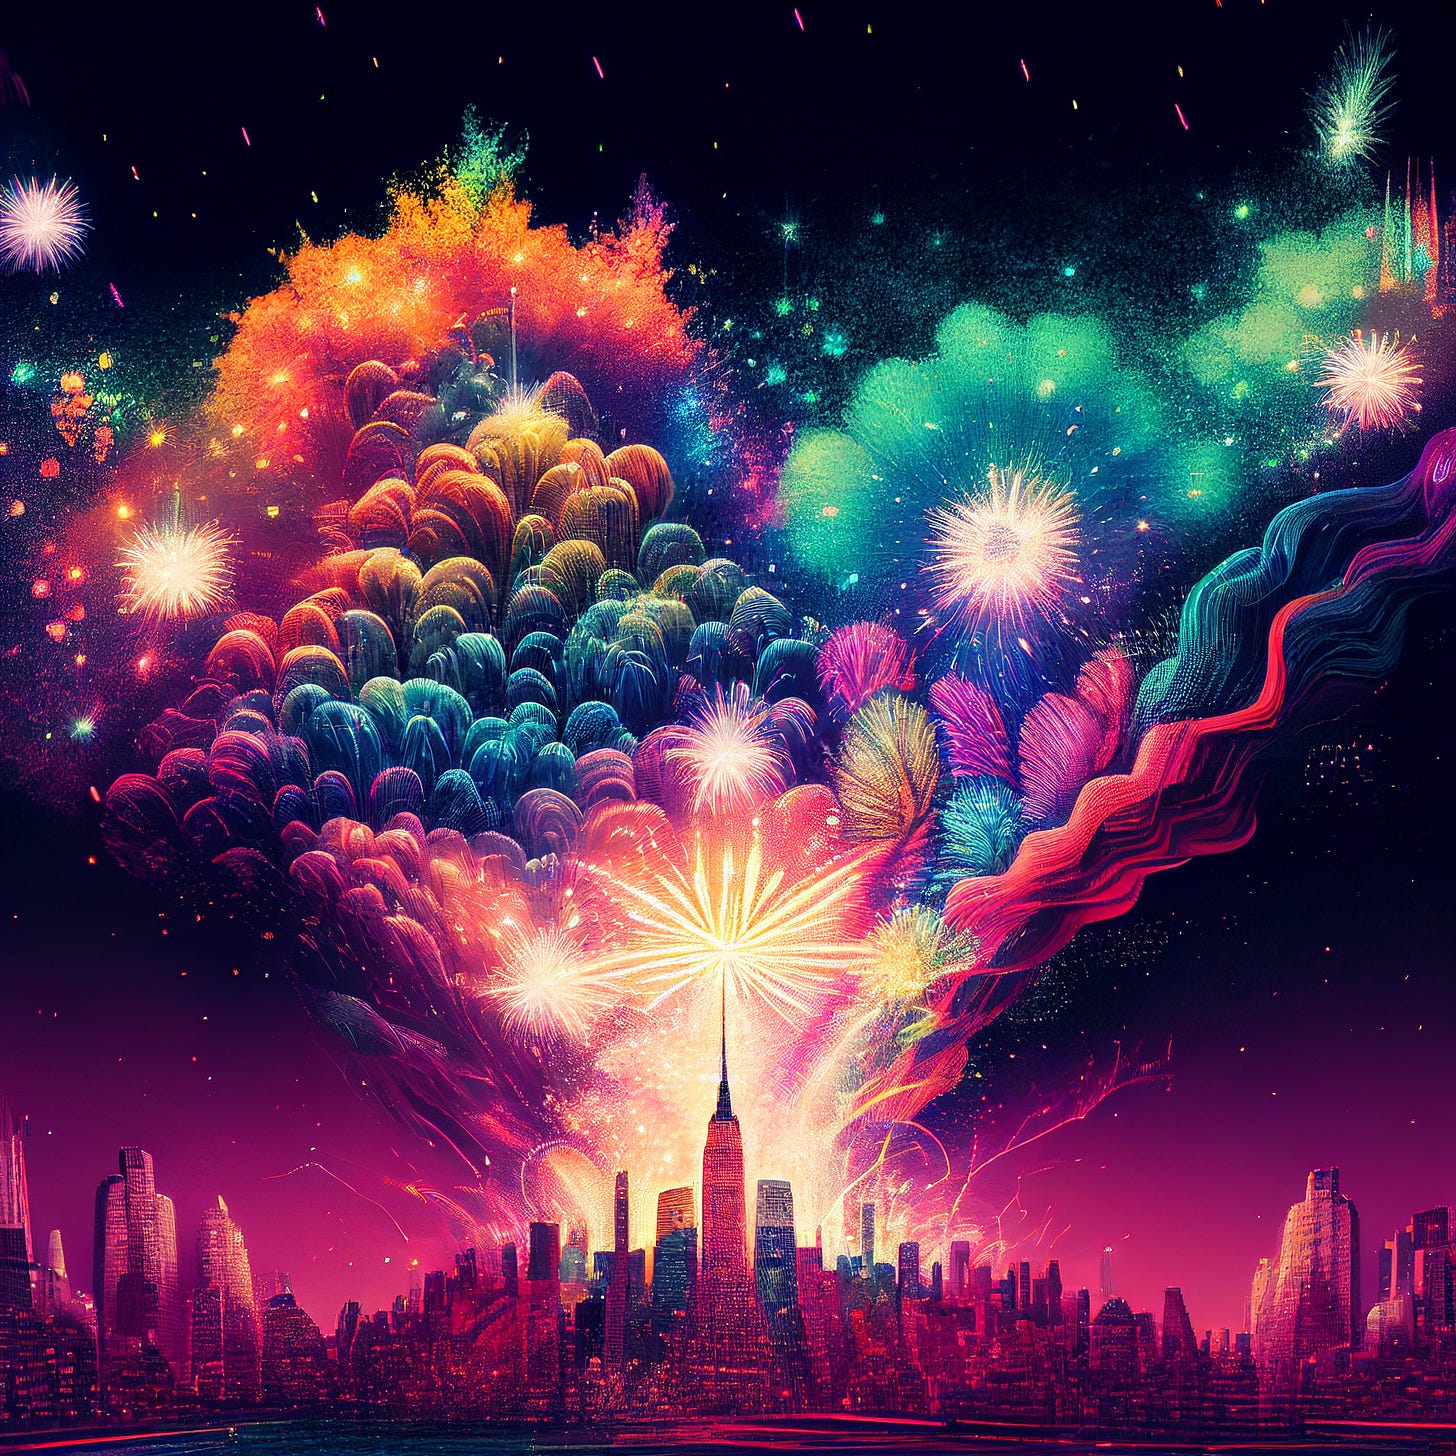 Psychedelic fireworks display above the New York City skyline. Pencil drawing with bright colors and bursts of light.